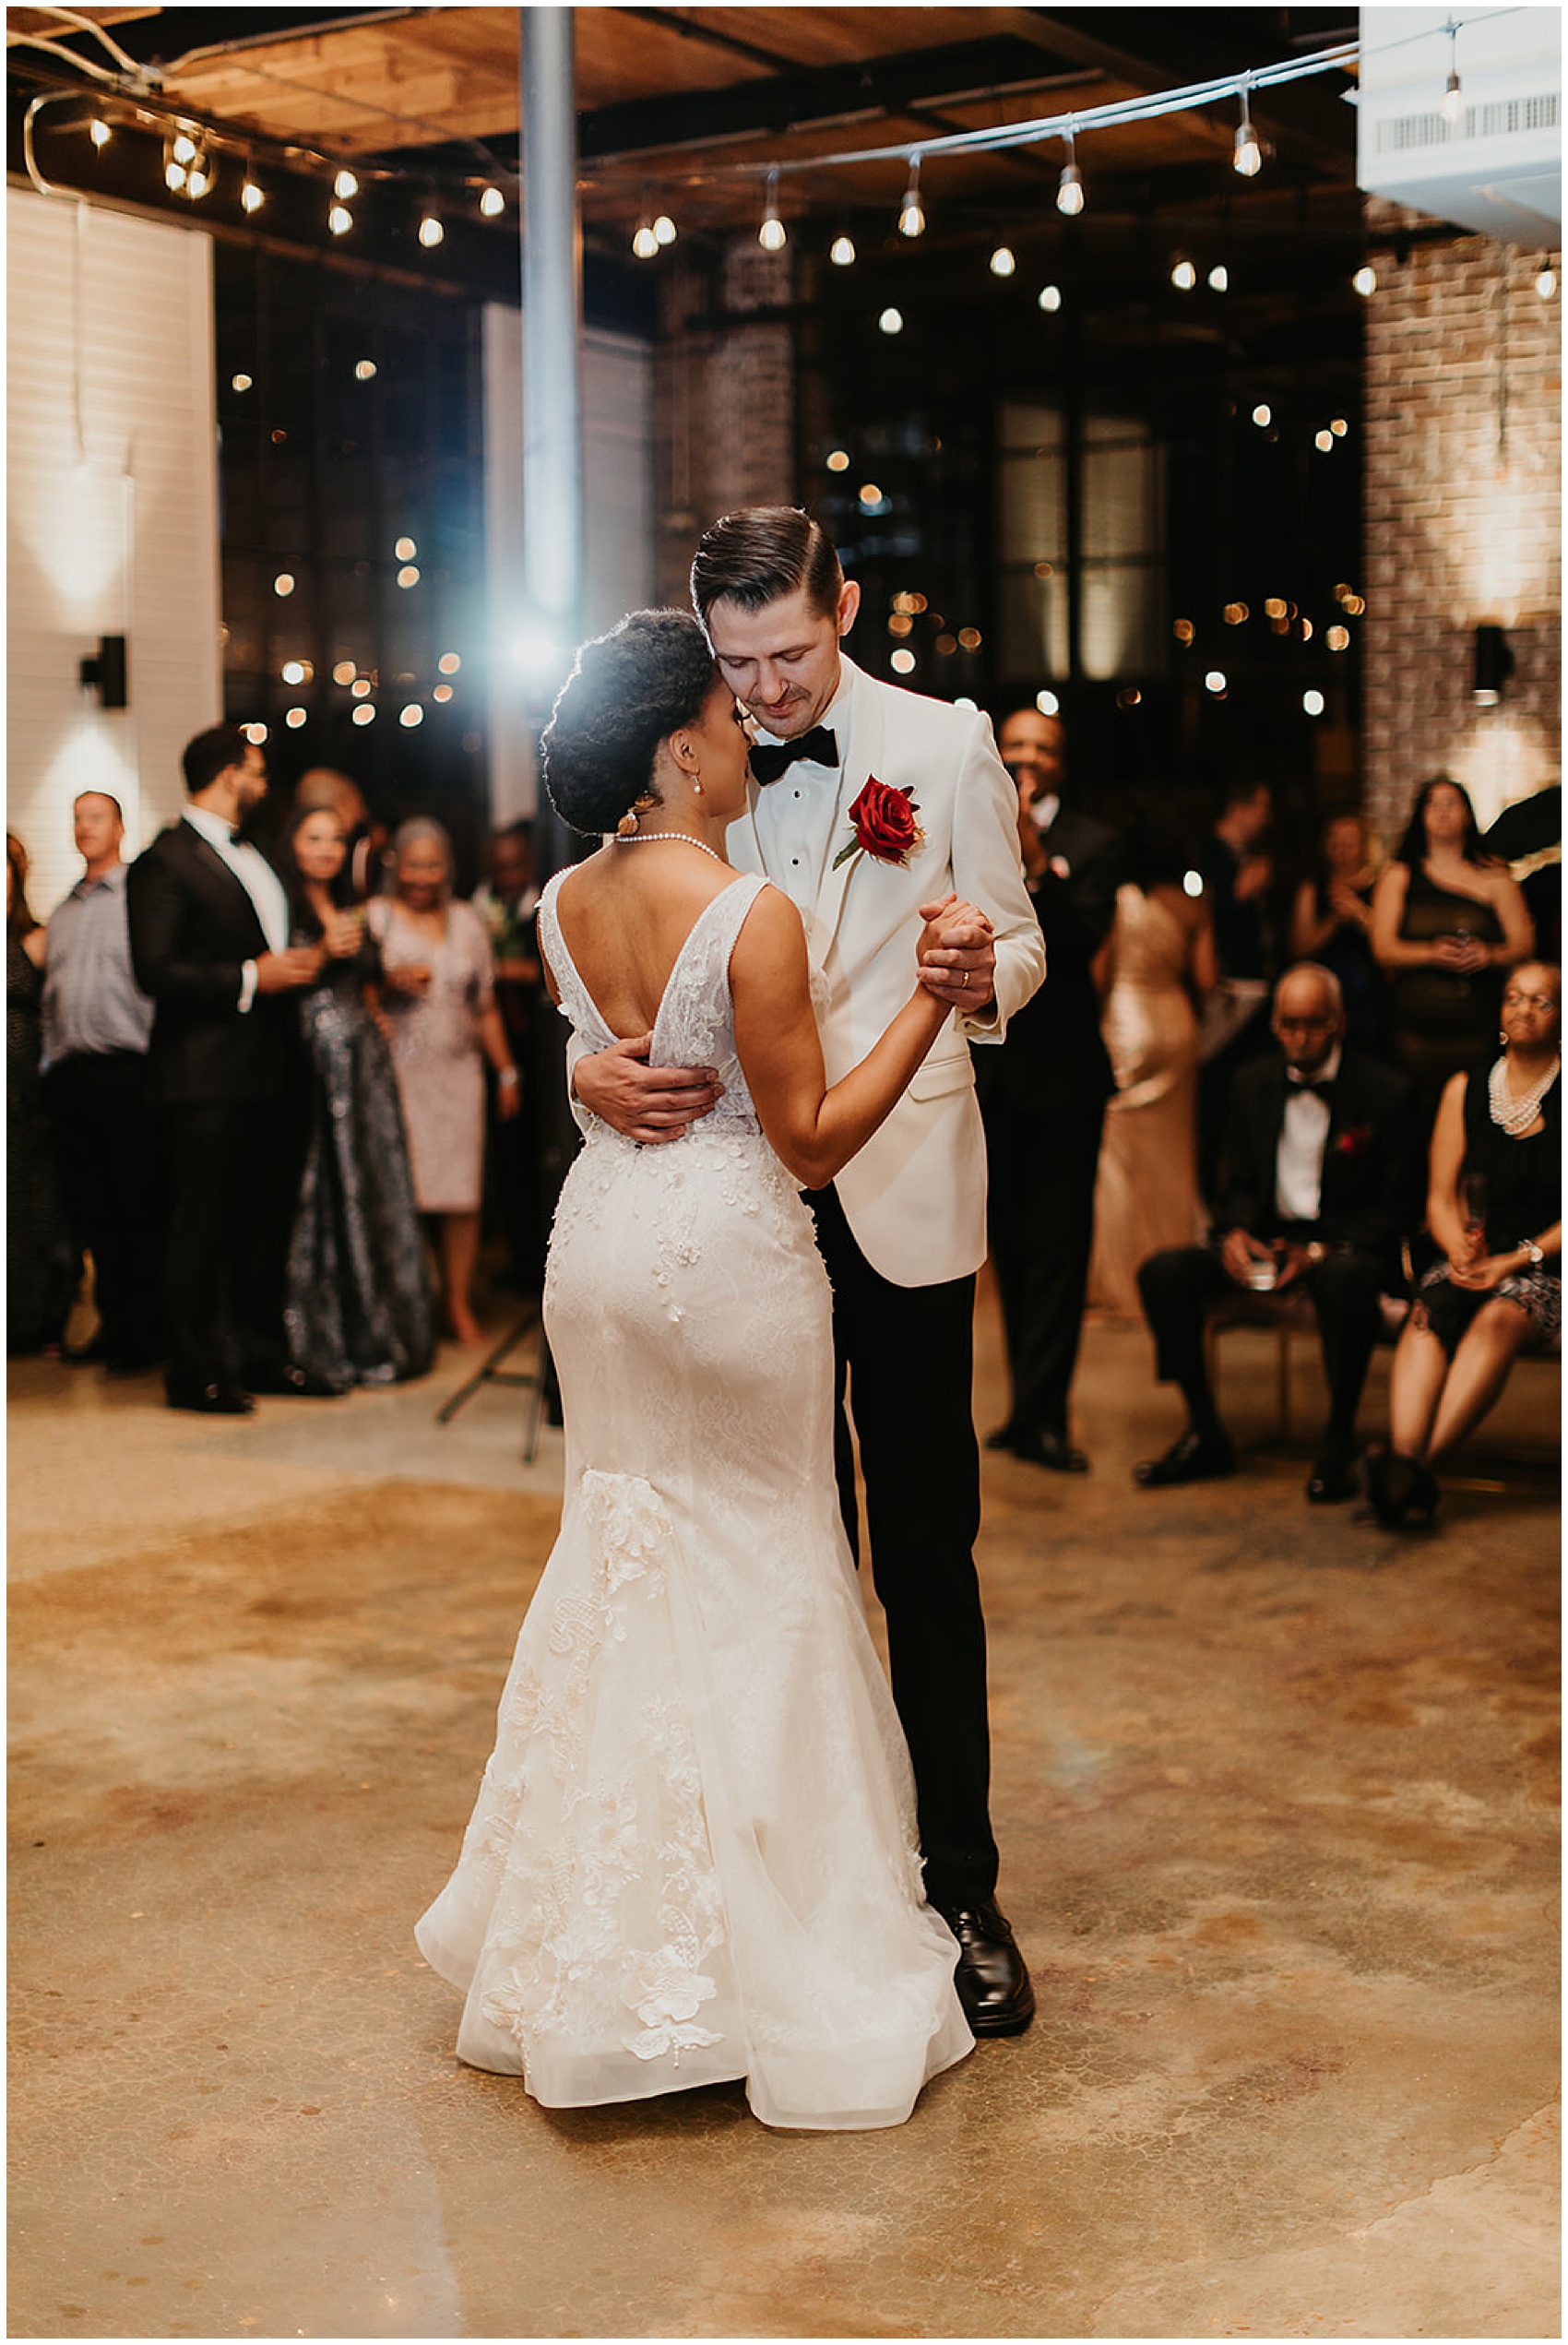 Newlyweds dance alone on the dance floor wearing a white jacket with red rose boutonniere